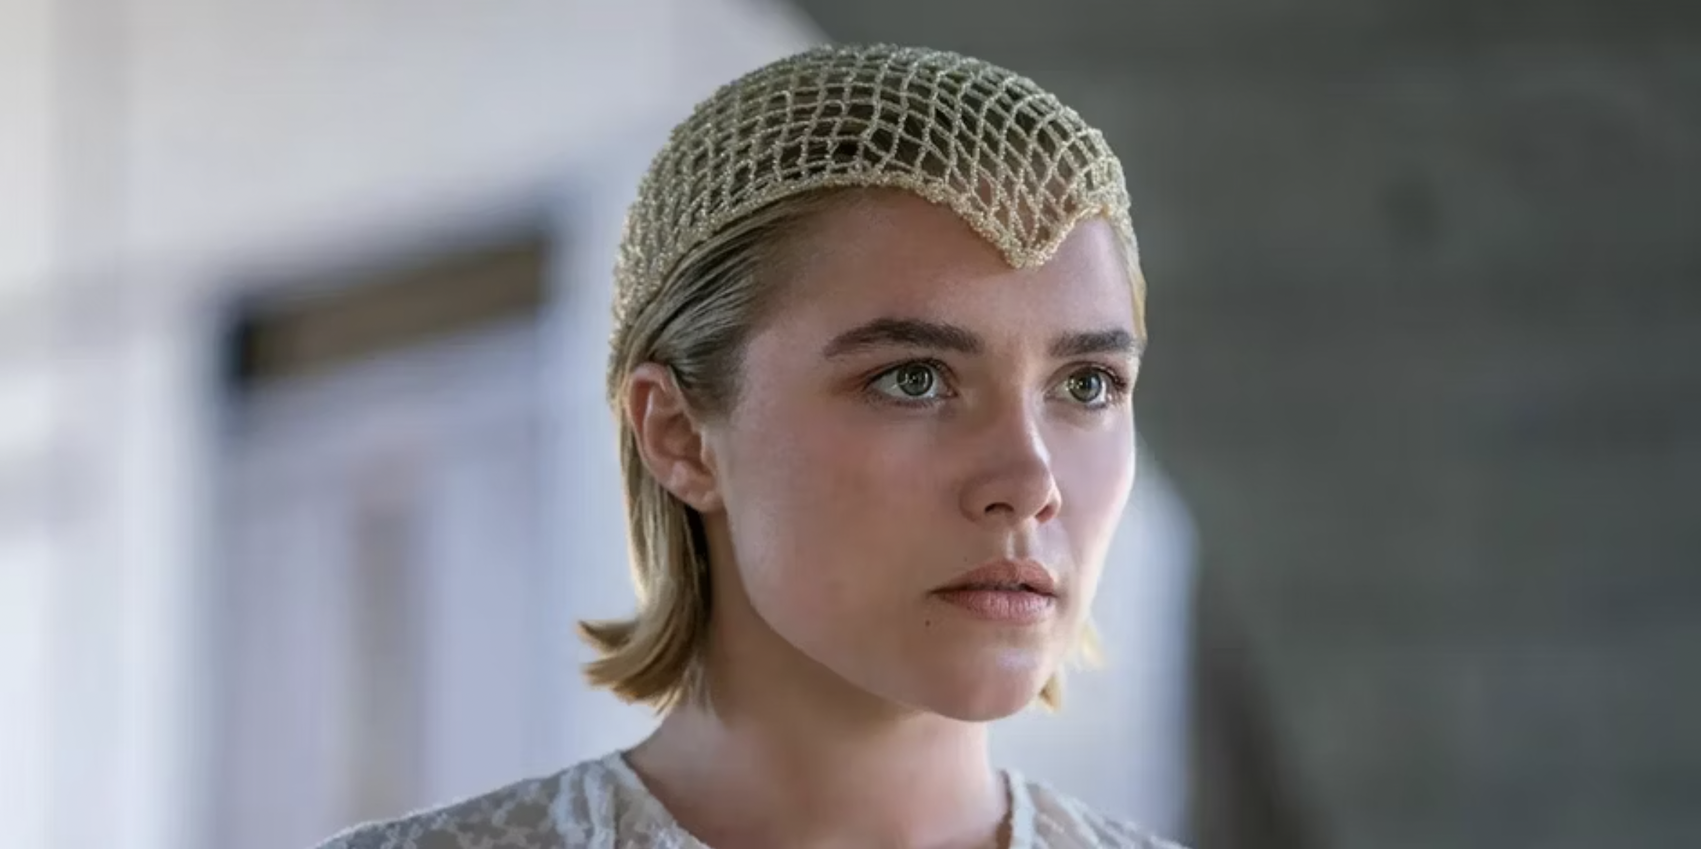 Florence Pugh as Princess Irulan who was trained at an early age as a Bene Gesserit Sister